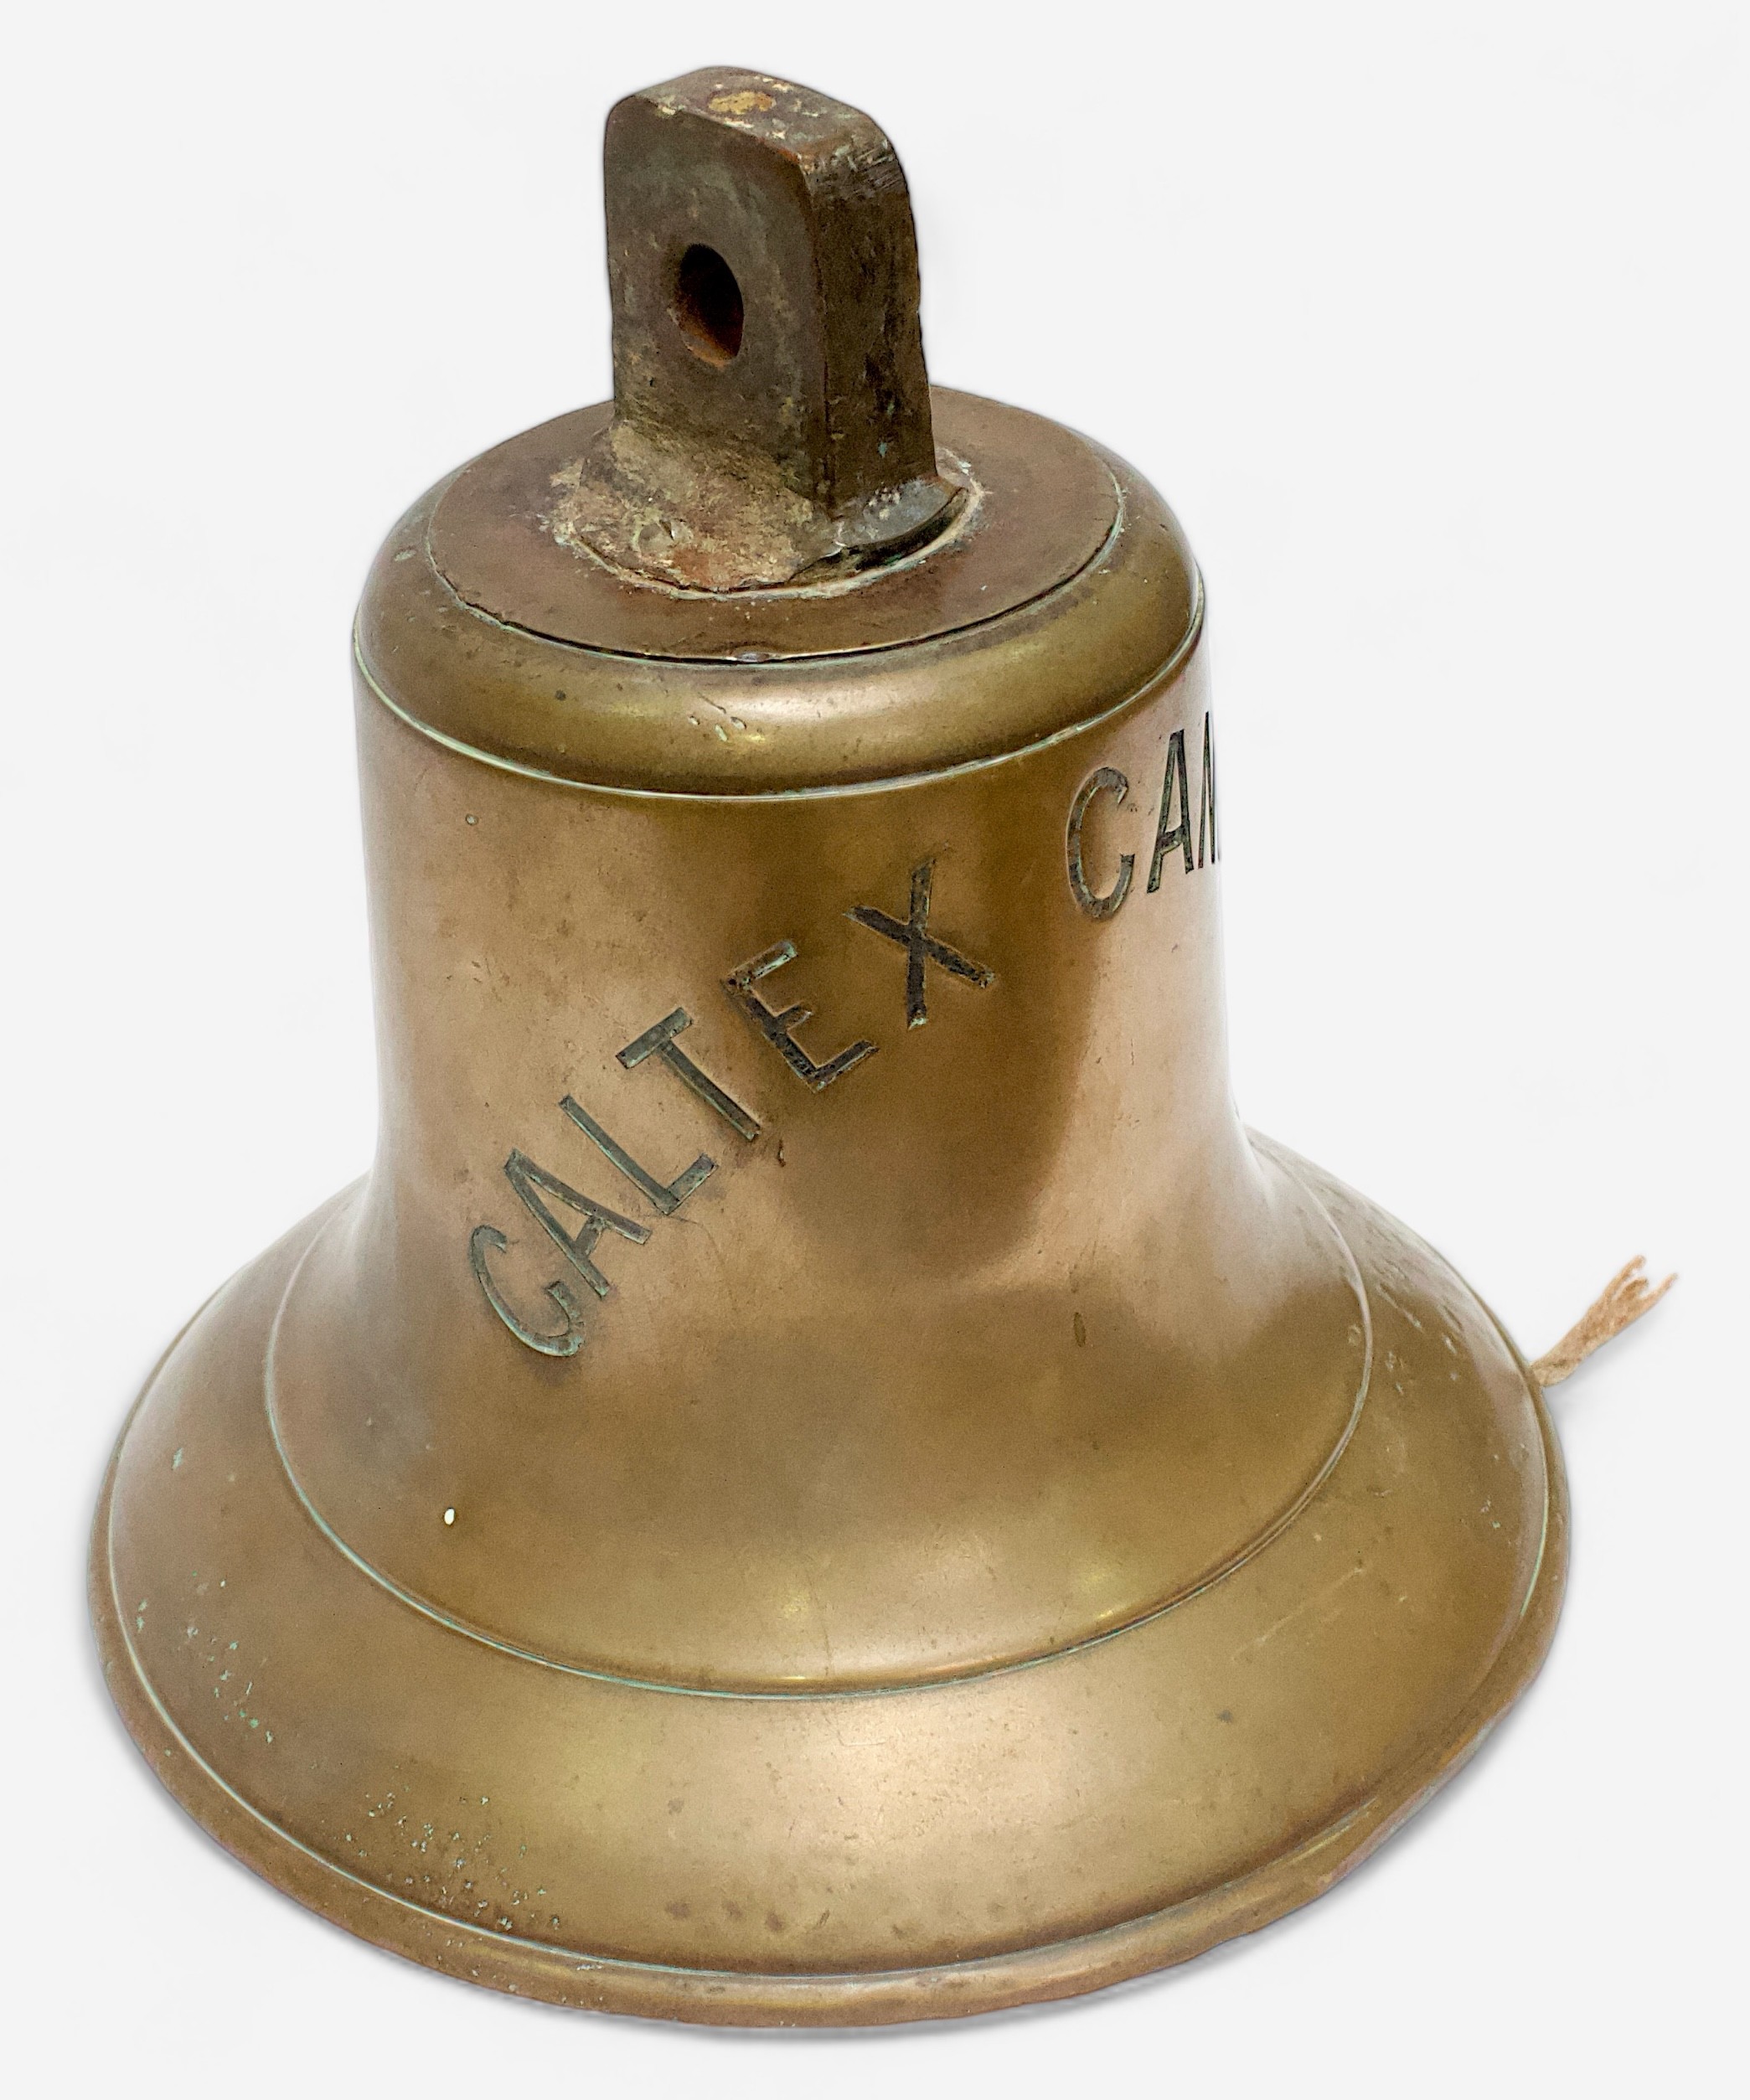 A large ships bell from the steel steam turbine oil tanker, Caltex Canberra, built by the Furness - Bild 2 aus 2